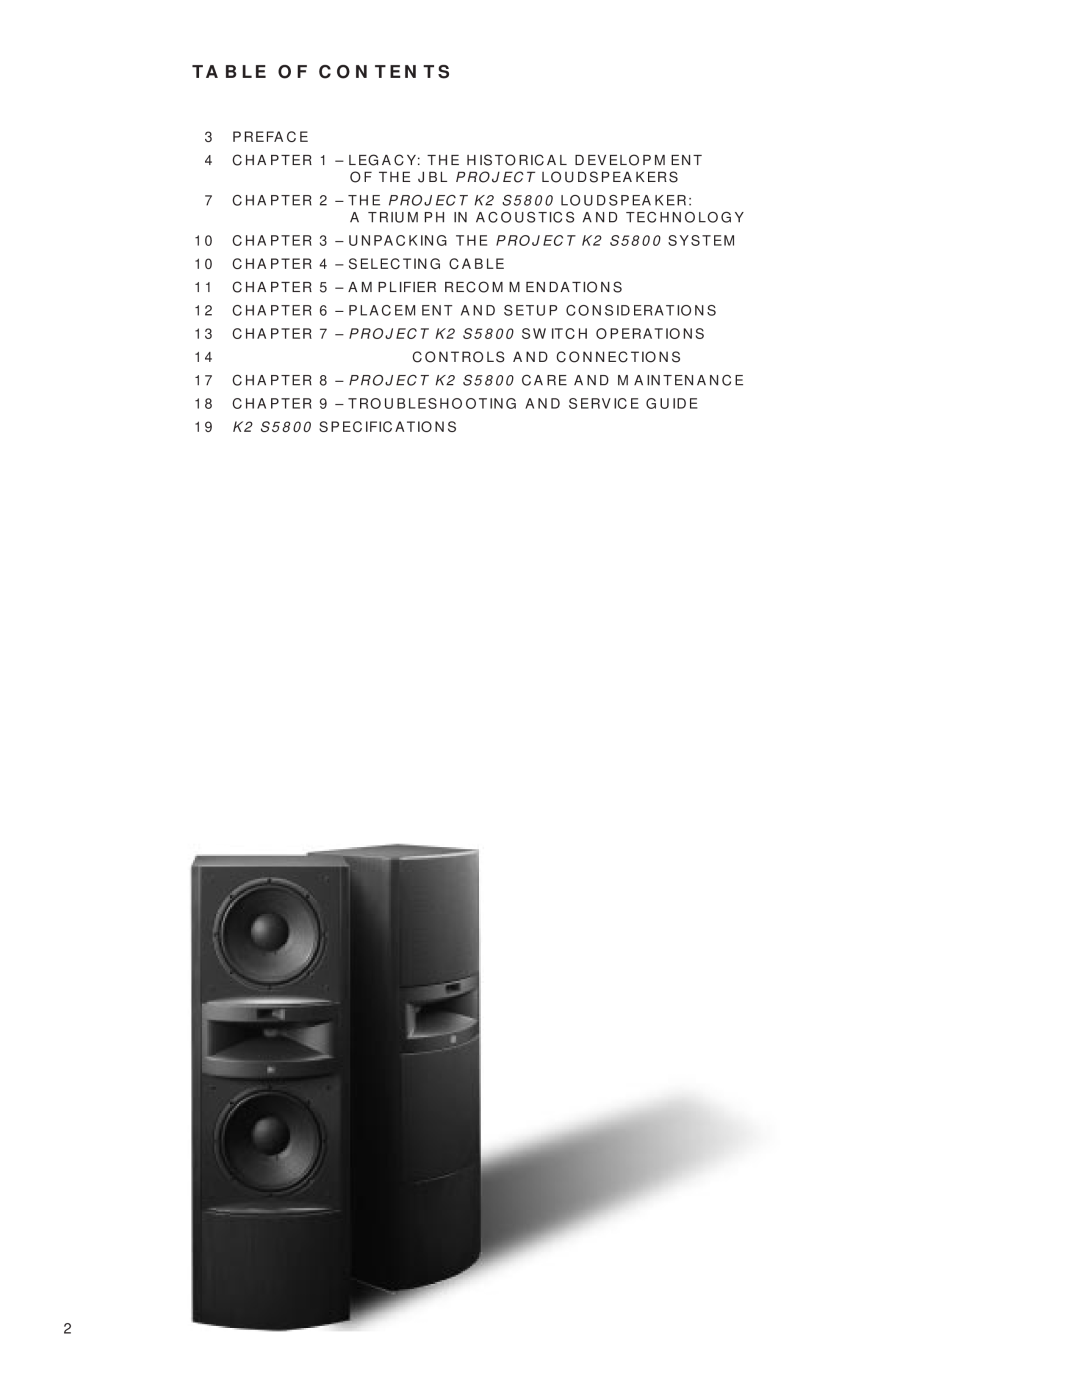 JBL K2 S5800 manual Table Of Contents 